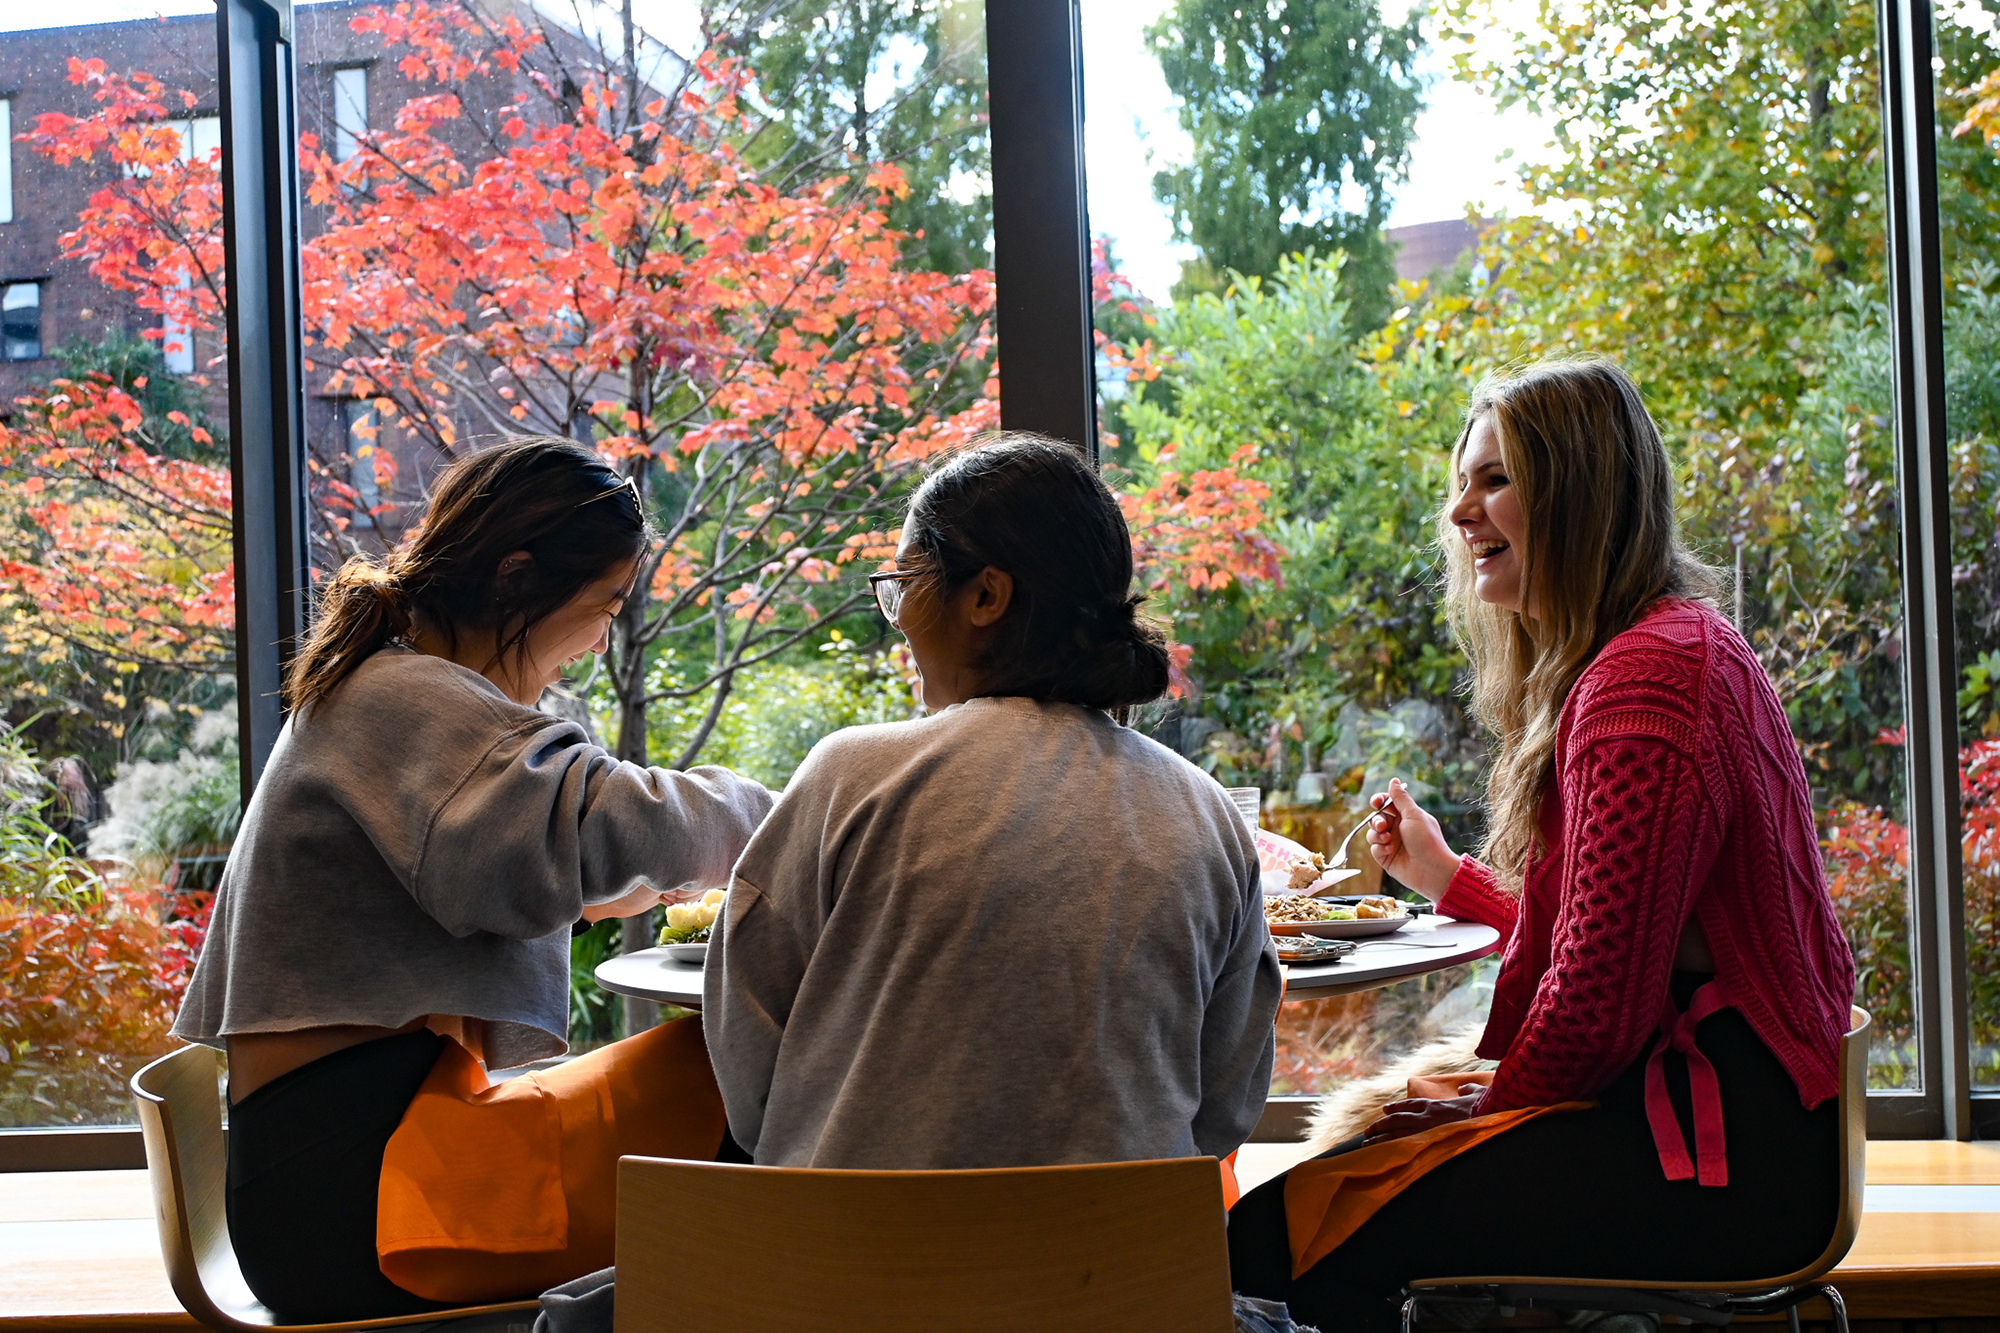 People dining with fall foliage in the background